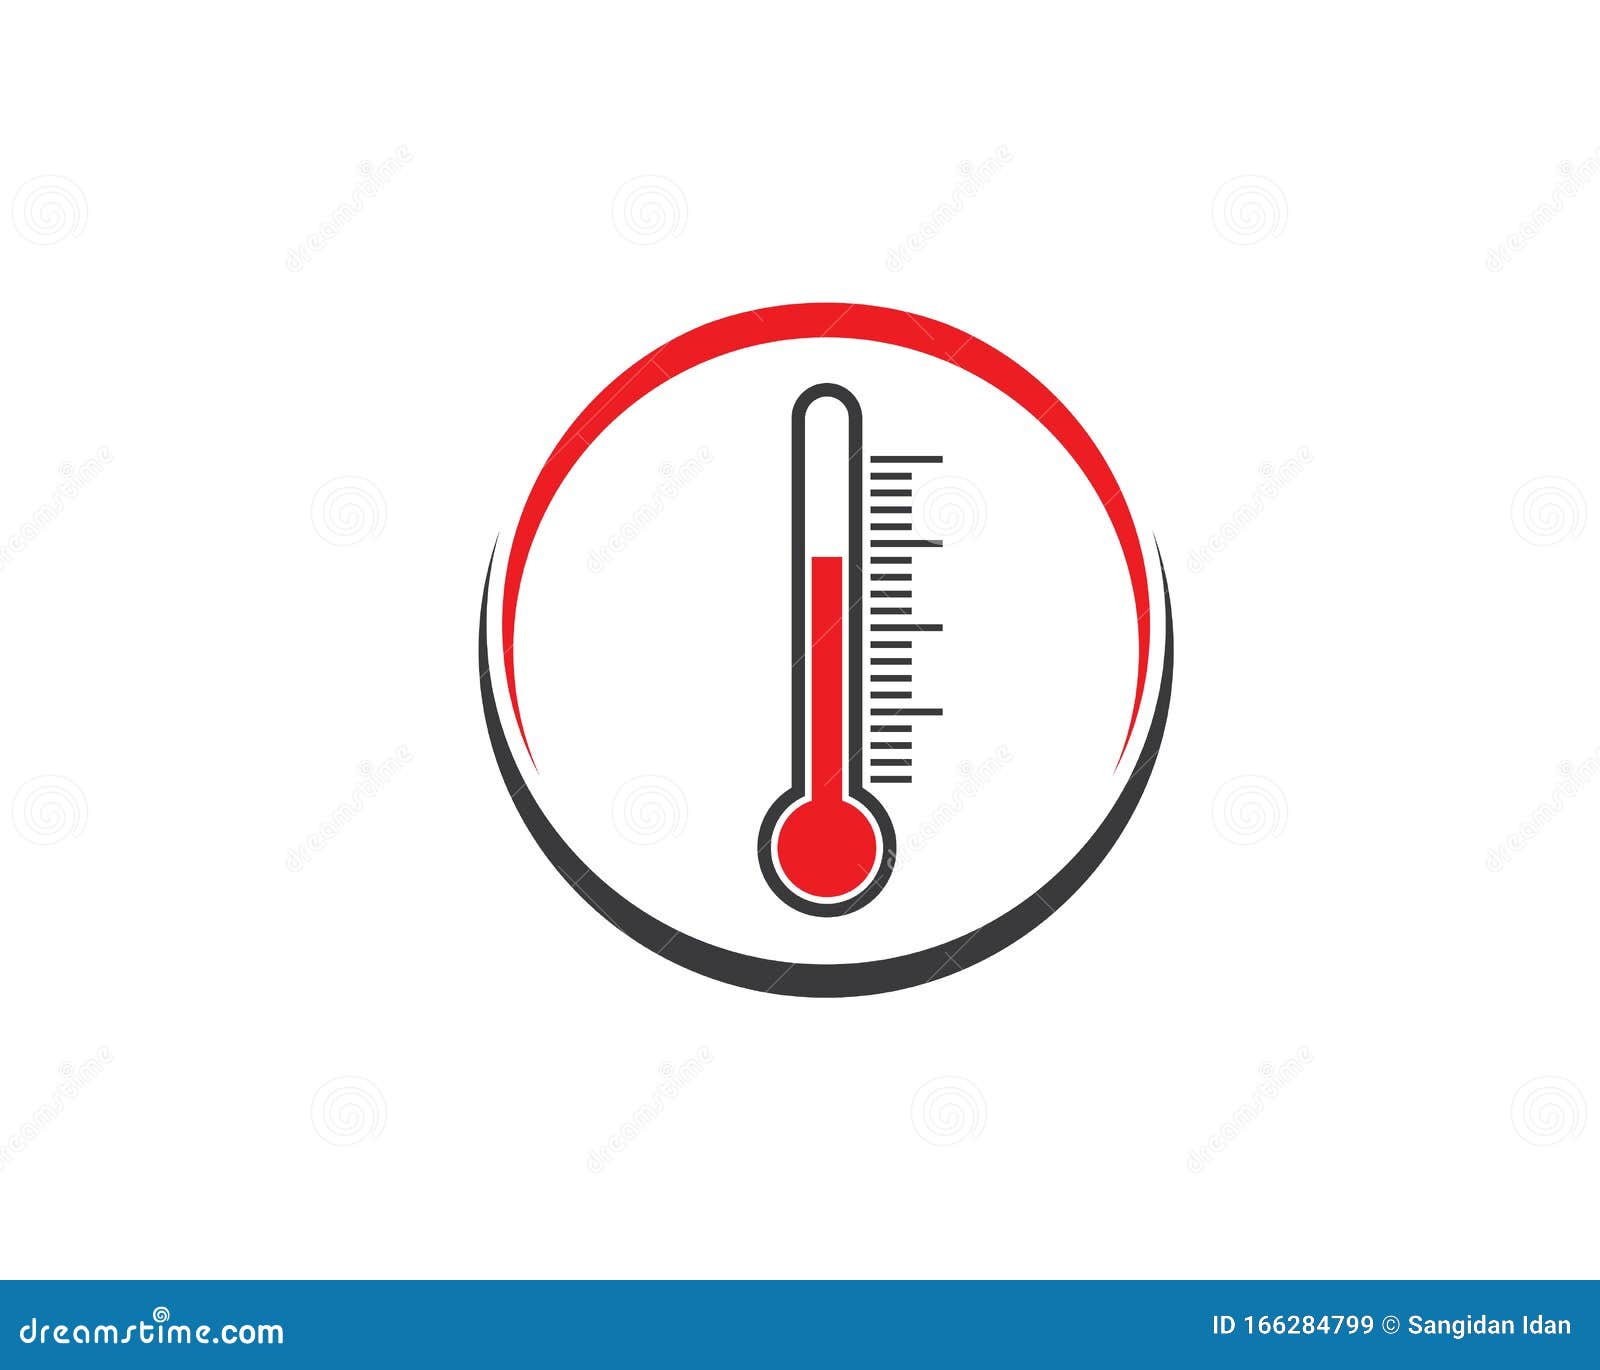 Thermometer Equipment Showing Hot Or Cold Weather. Thermometer Icon.Celsius  And Fahrenheit Meteorology Thermometers Measuring , Vector Illustration.  Royalty Free SVG, Cliparts, Vectors, and Stock Illustration. Image  117385185.